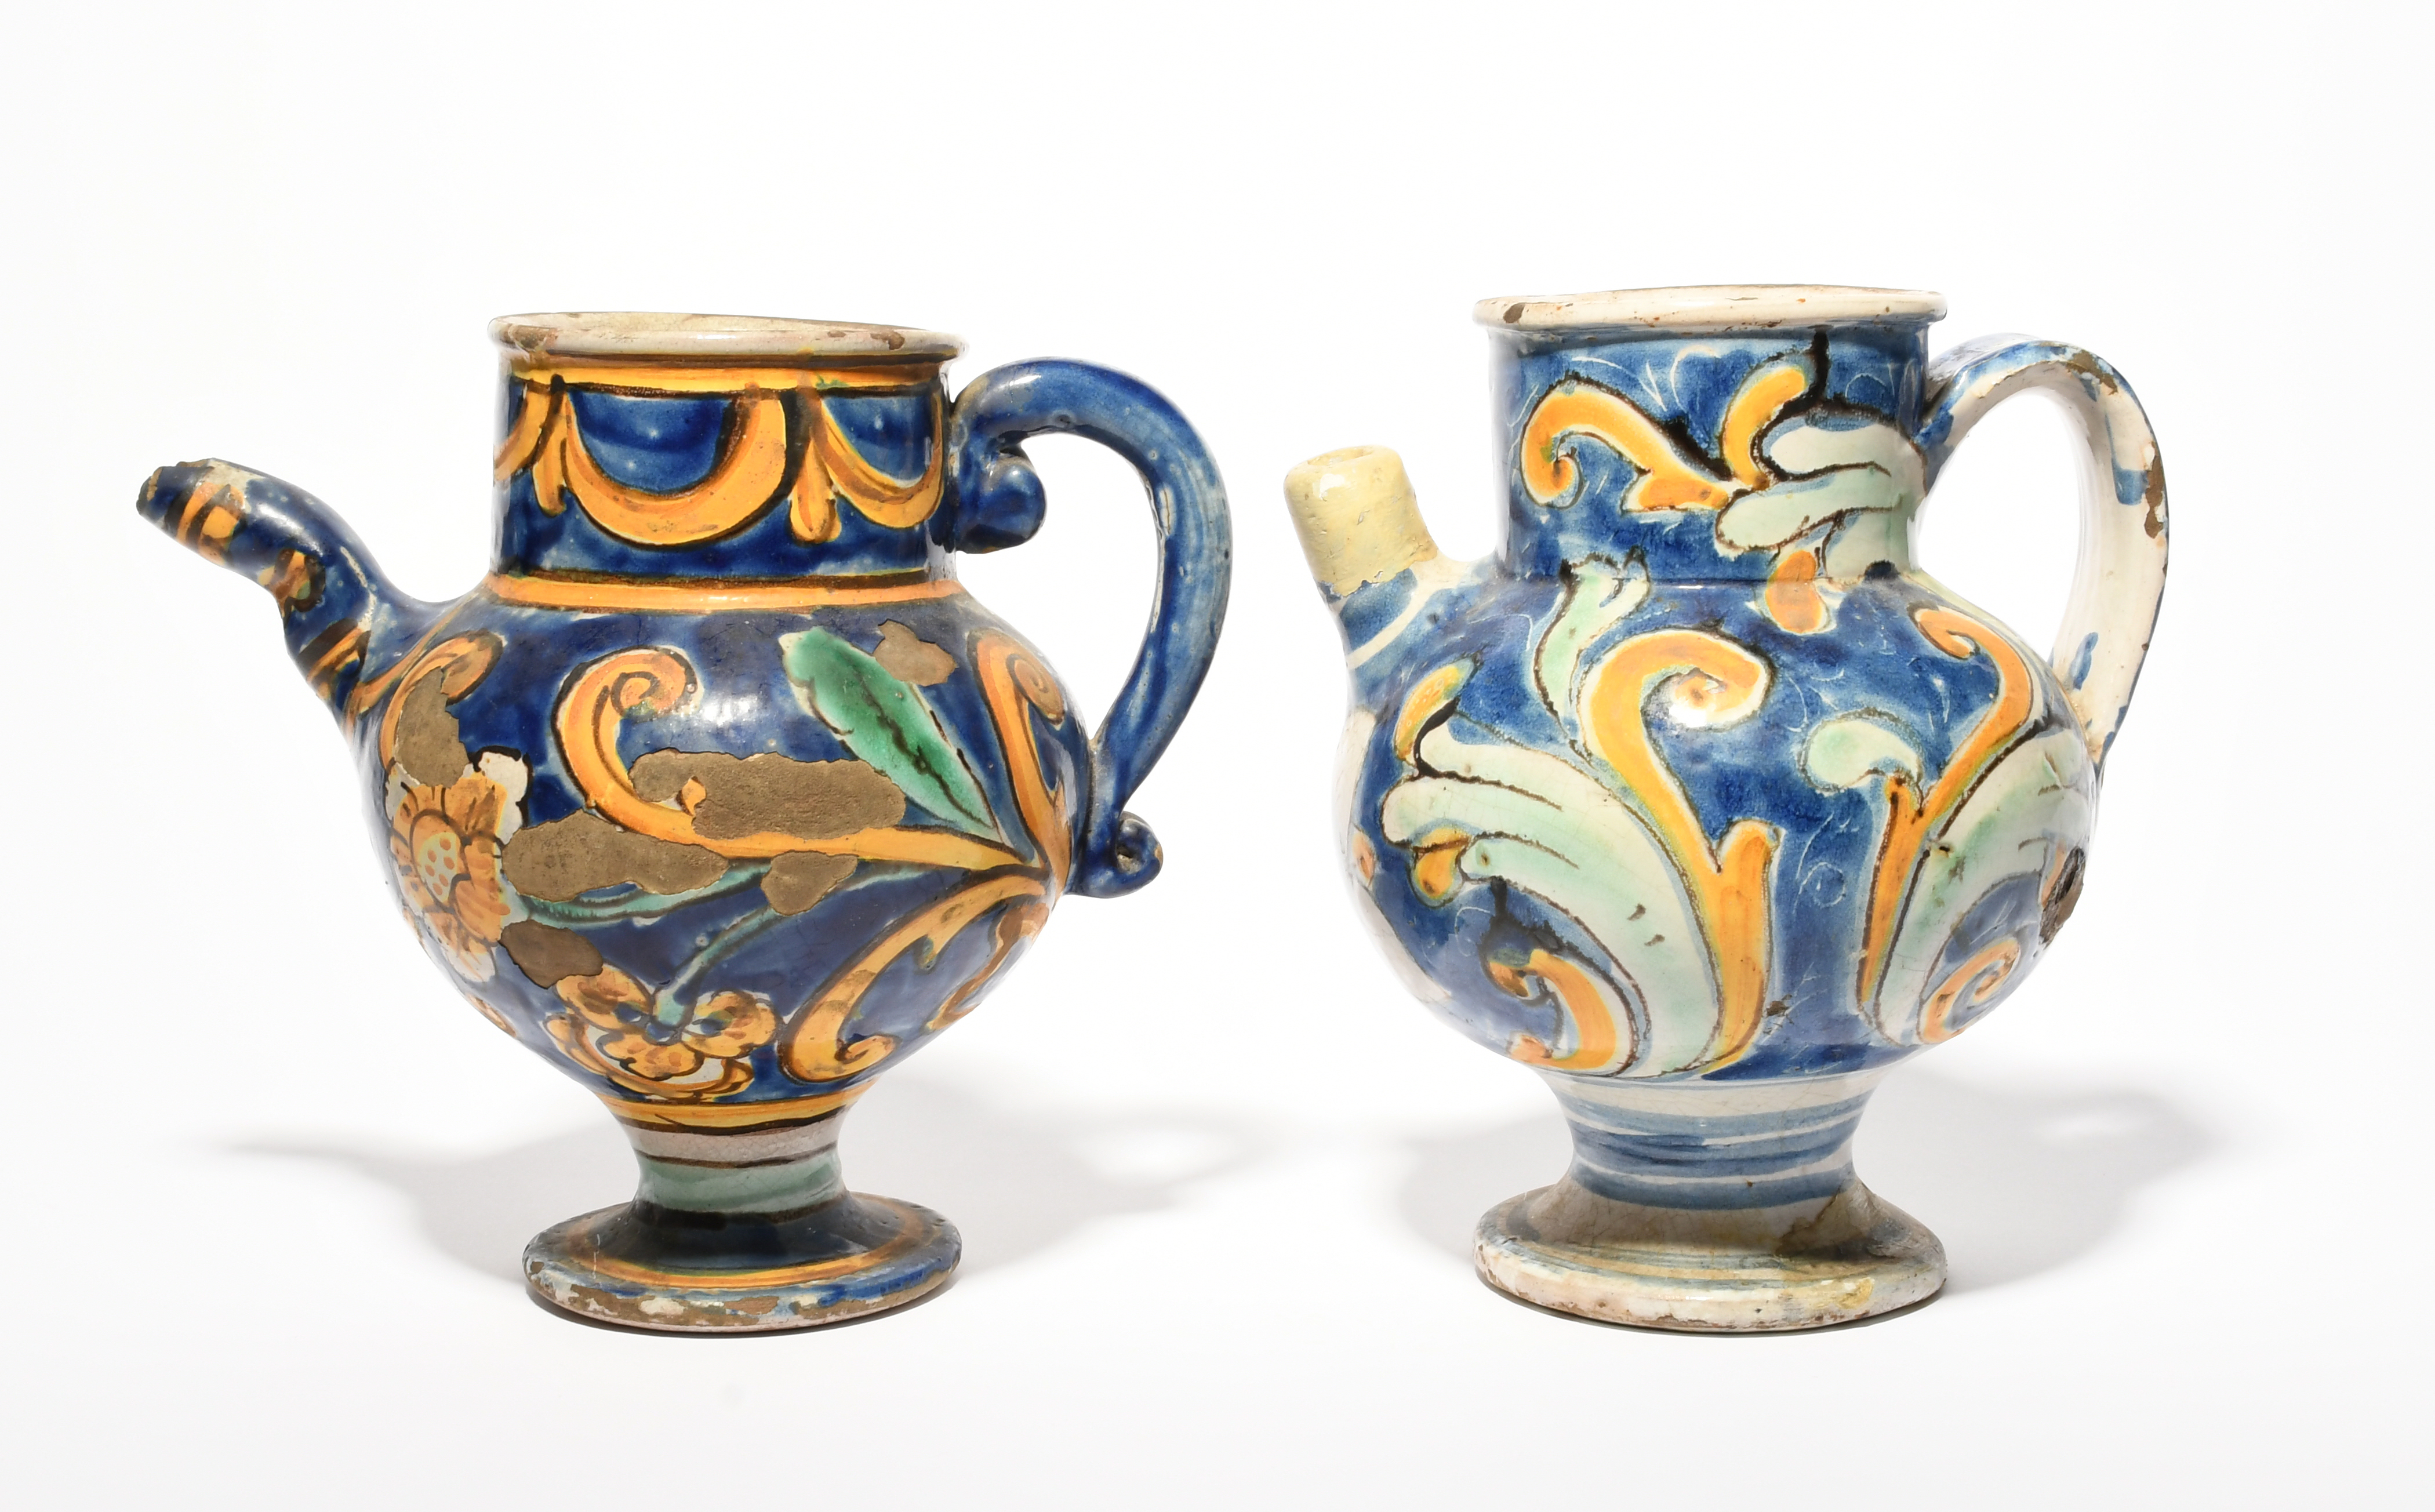 Two Caltagirone maiolica wet drug jars or ewers, 18th/19th century, typically decorated with - Image 3 of 3